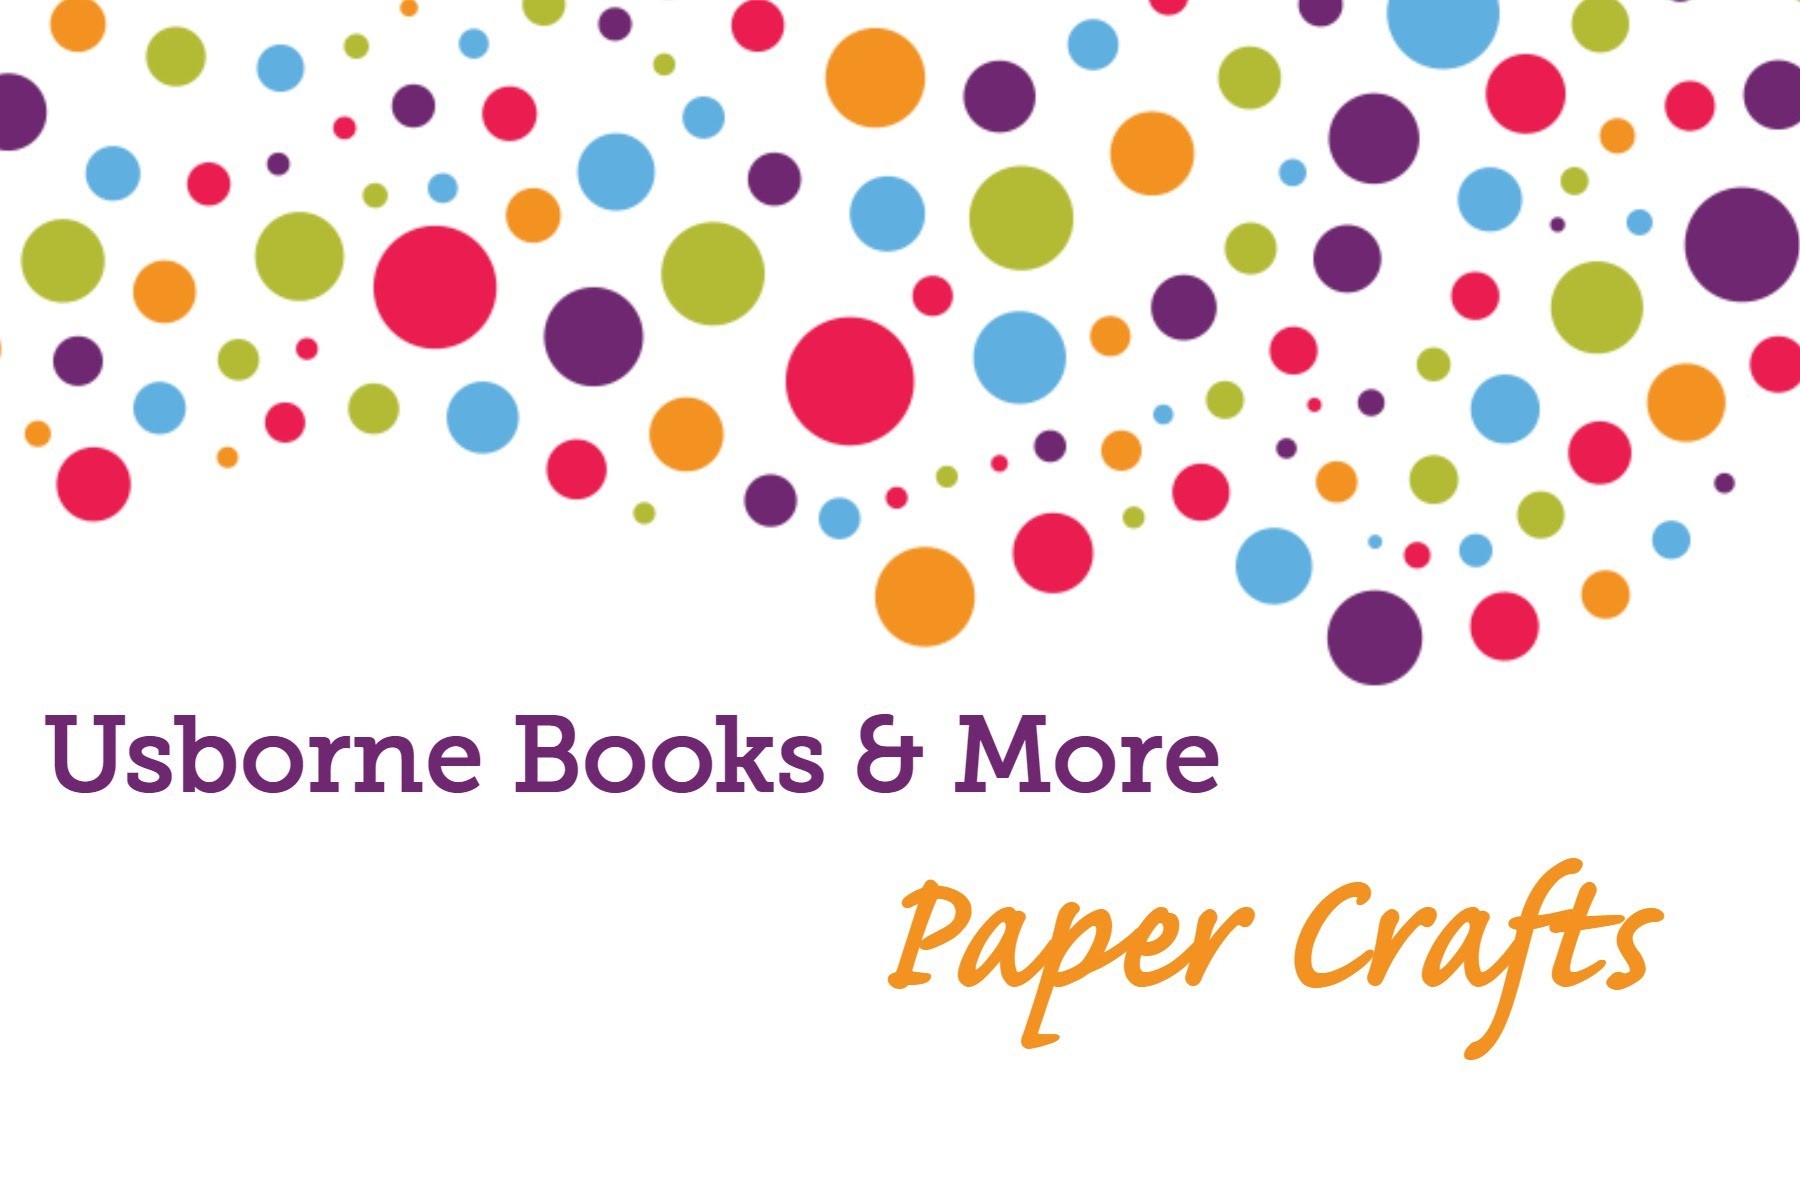 Usborne,Books,&,More,Paper,Crafts,Take,a,peek,at,some,of,the,fun,pa...